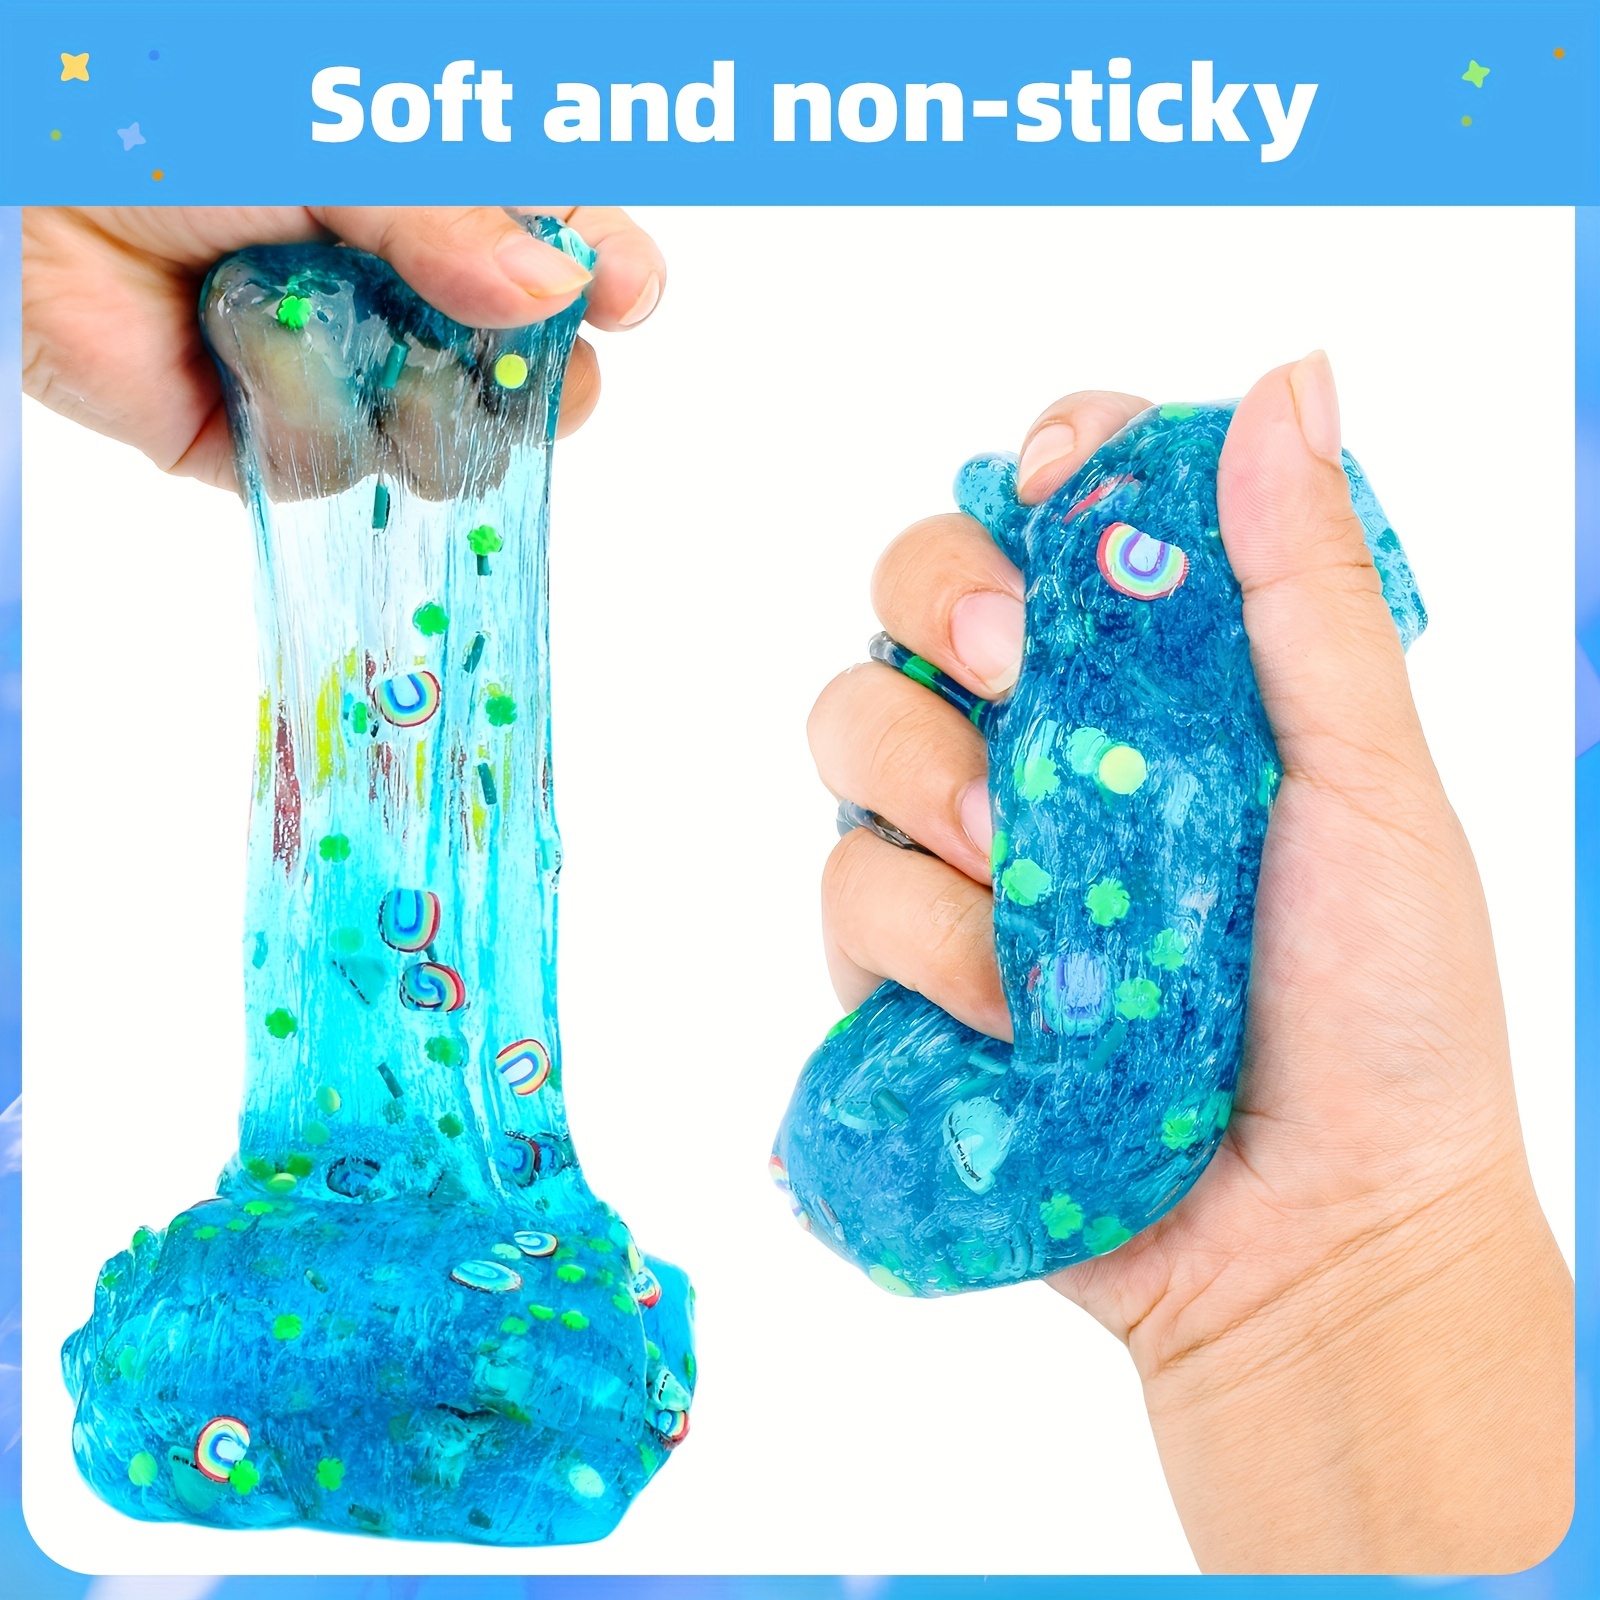 How to Make Stress-Relieving Glitter Slime